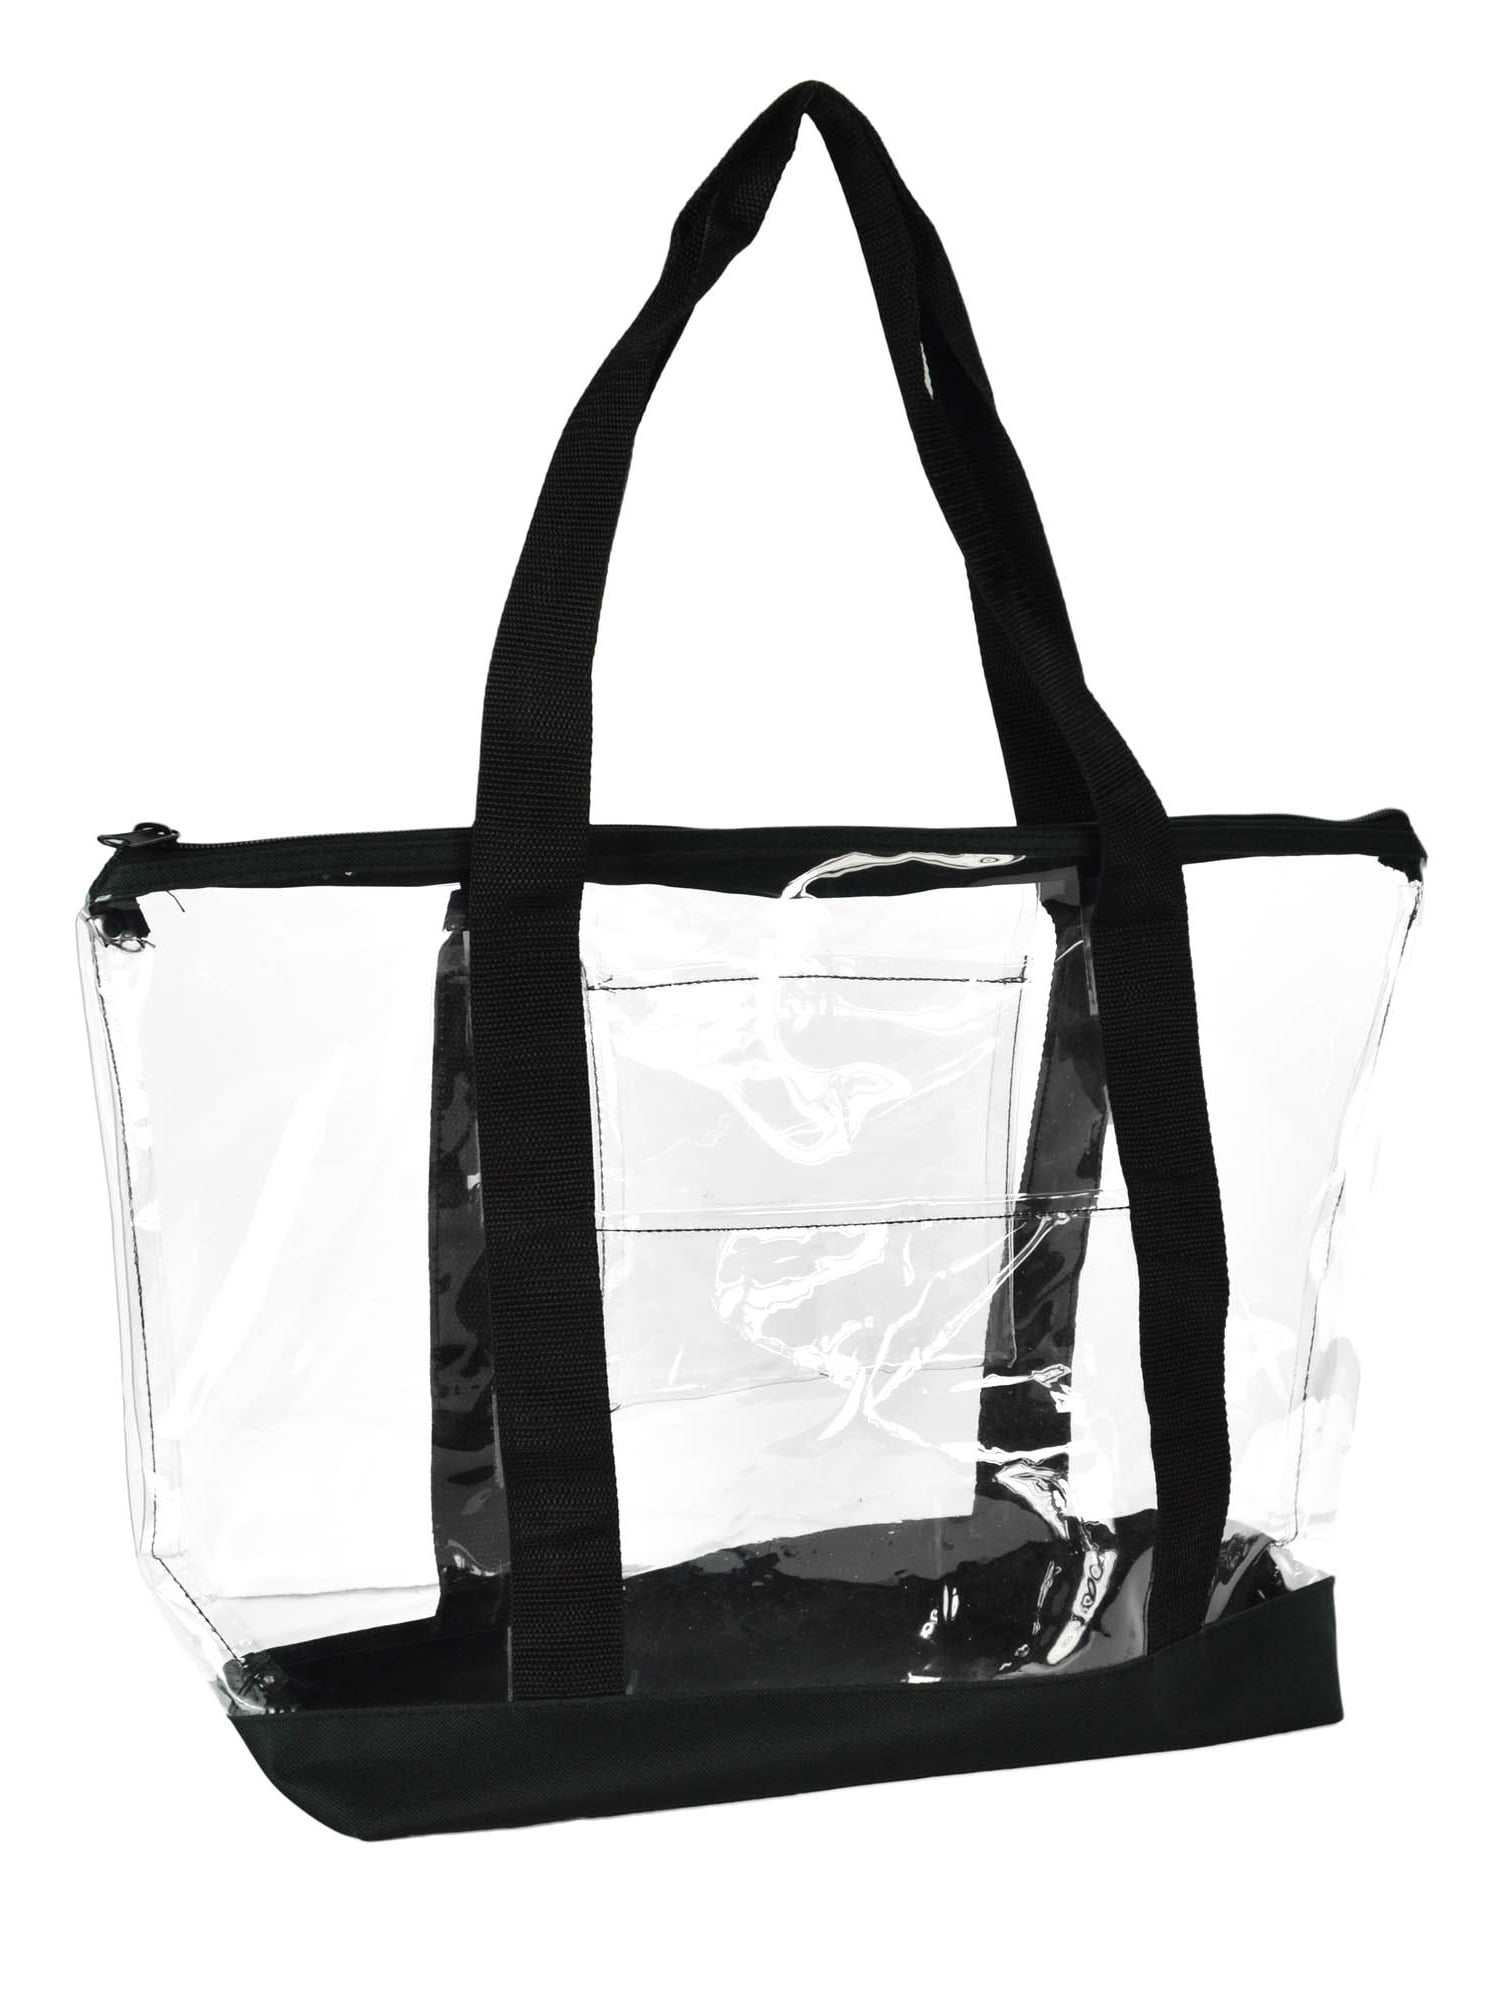 louis vuitton clear plastic tote bag,Save up to 17%,www